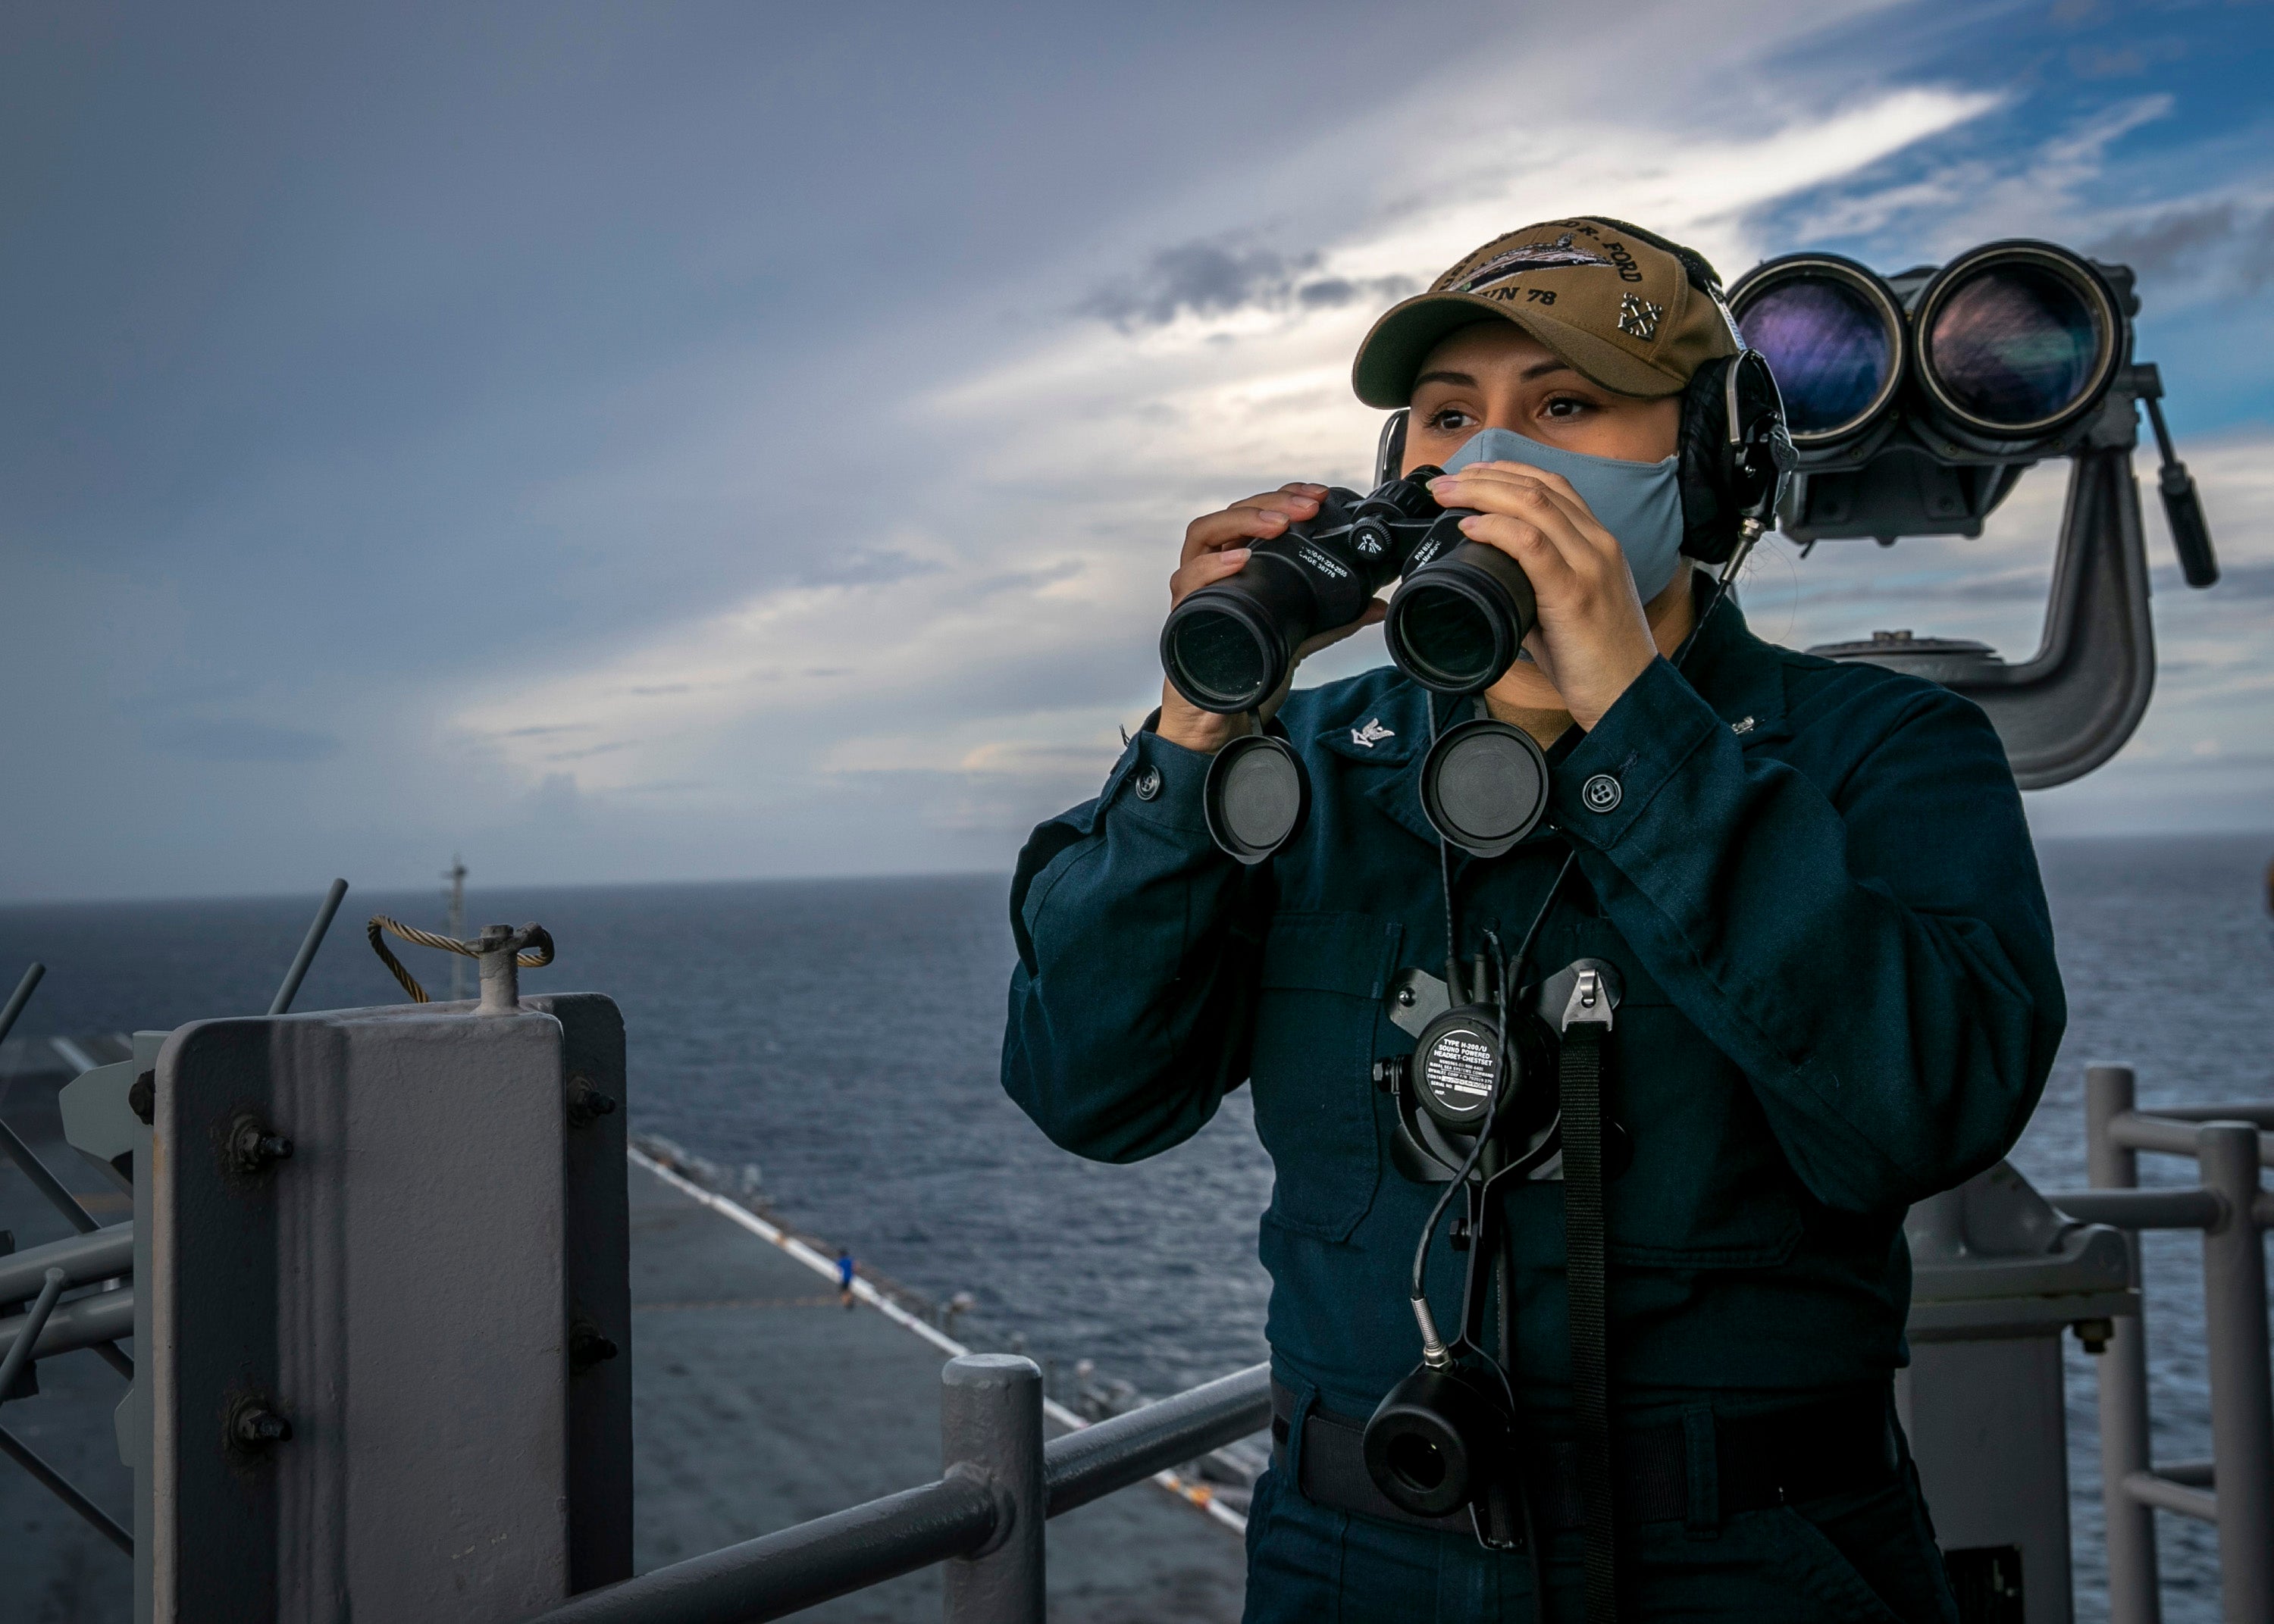 Meet the ‘Iron 9,’ the USS Gerald R. Ford’s all-female bridge watch section